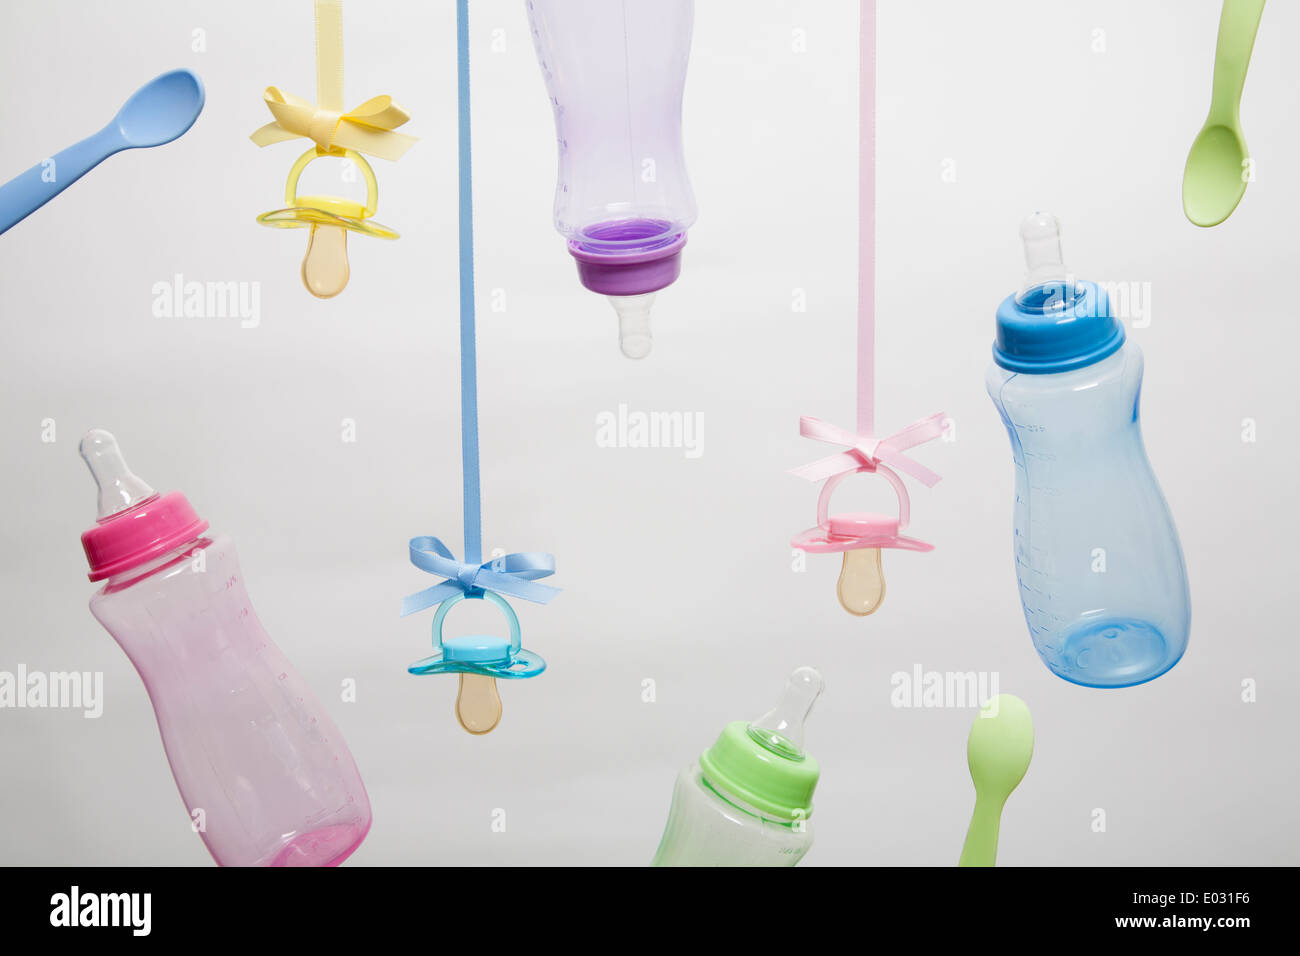 https://c8.alamy.com/comp/E031F6/baby-feeding-bottles-baby-spoons-and-pacifiers-hanging-from-ribbons-E031F6.jpg